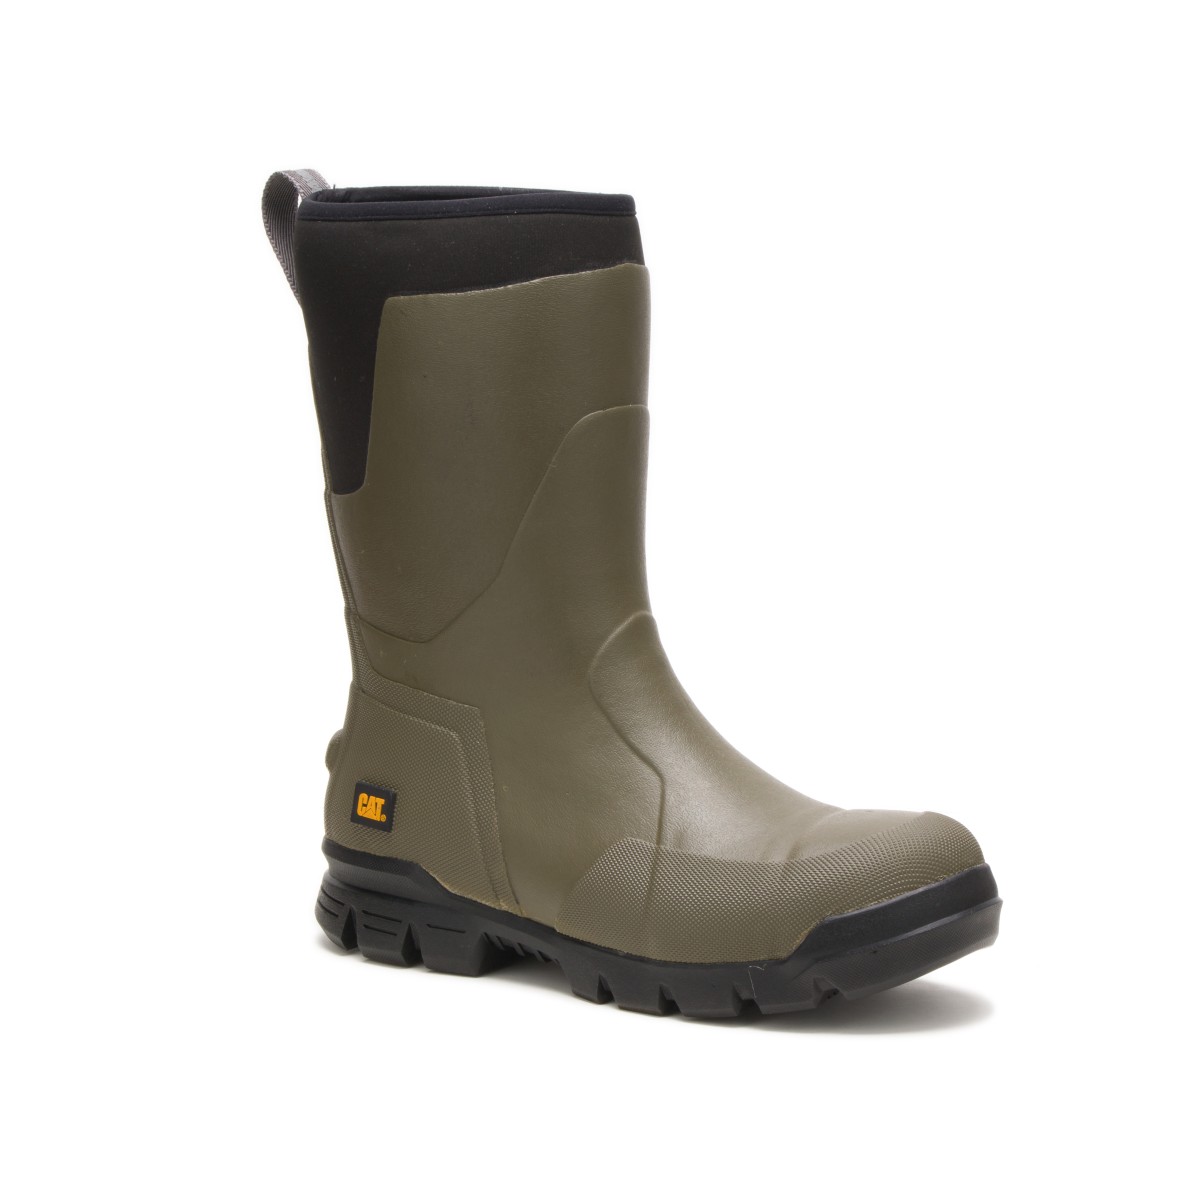 Caterpillar Casual 11" Stormers Unisex Boots Waterproof P724051 Yellow-NEW STYLE